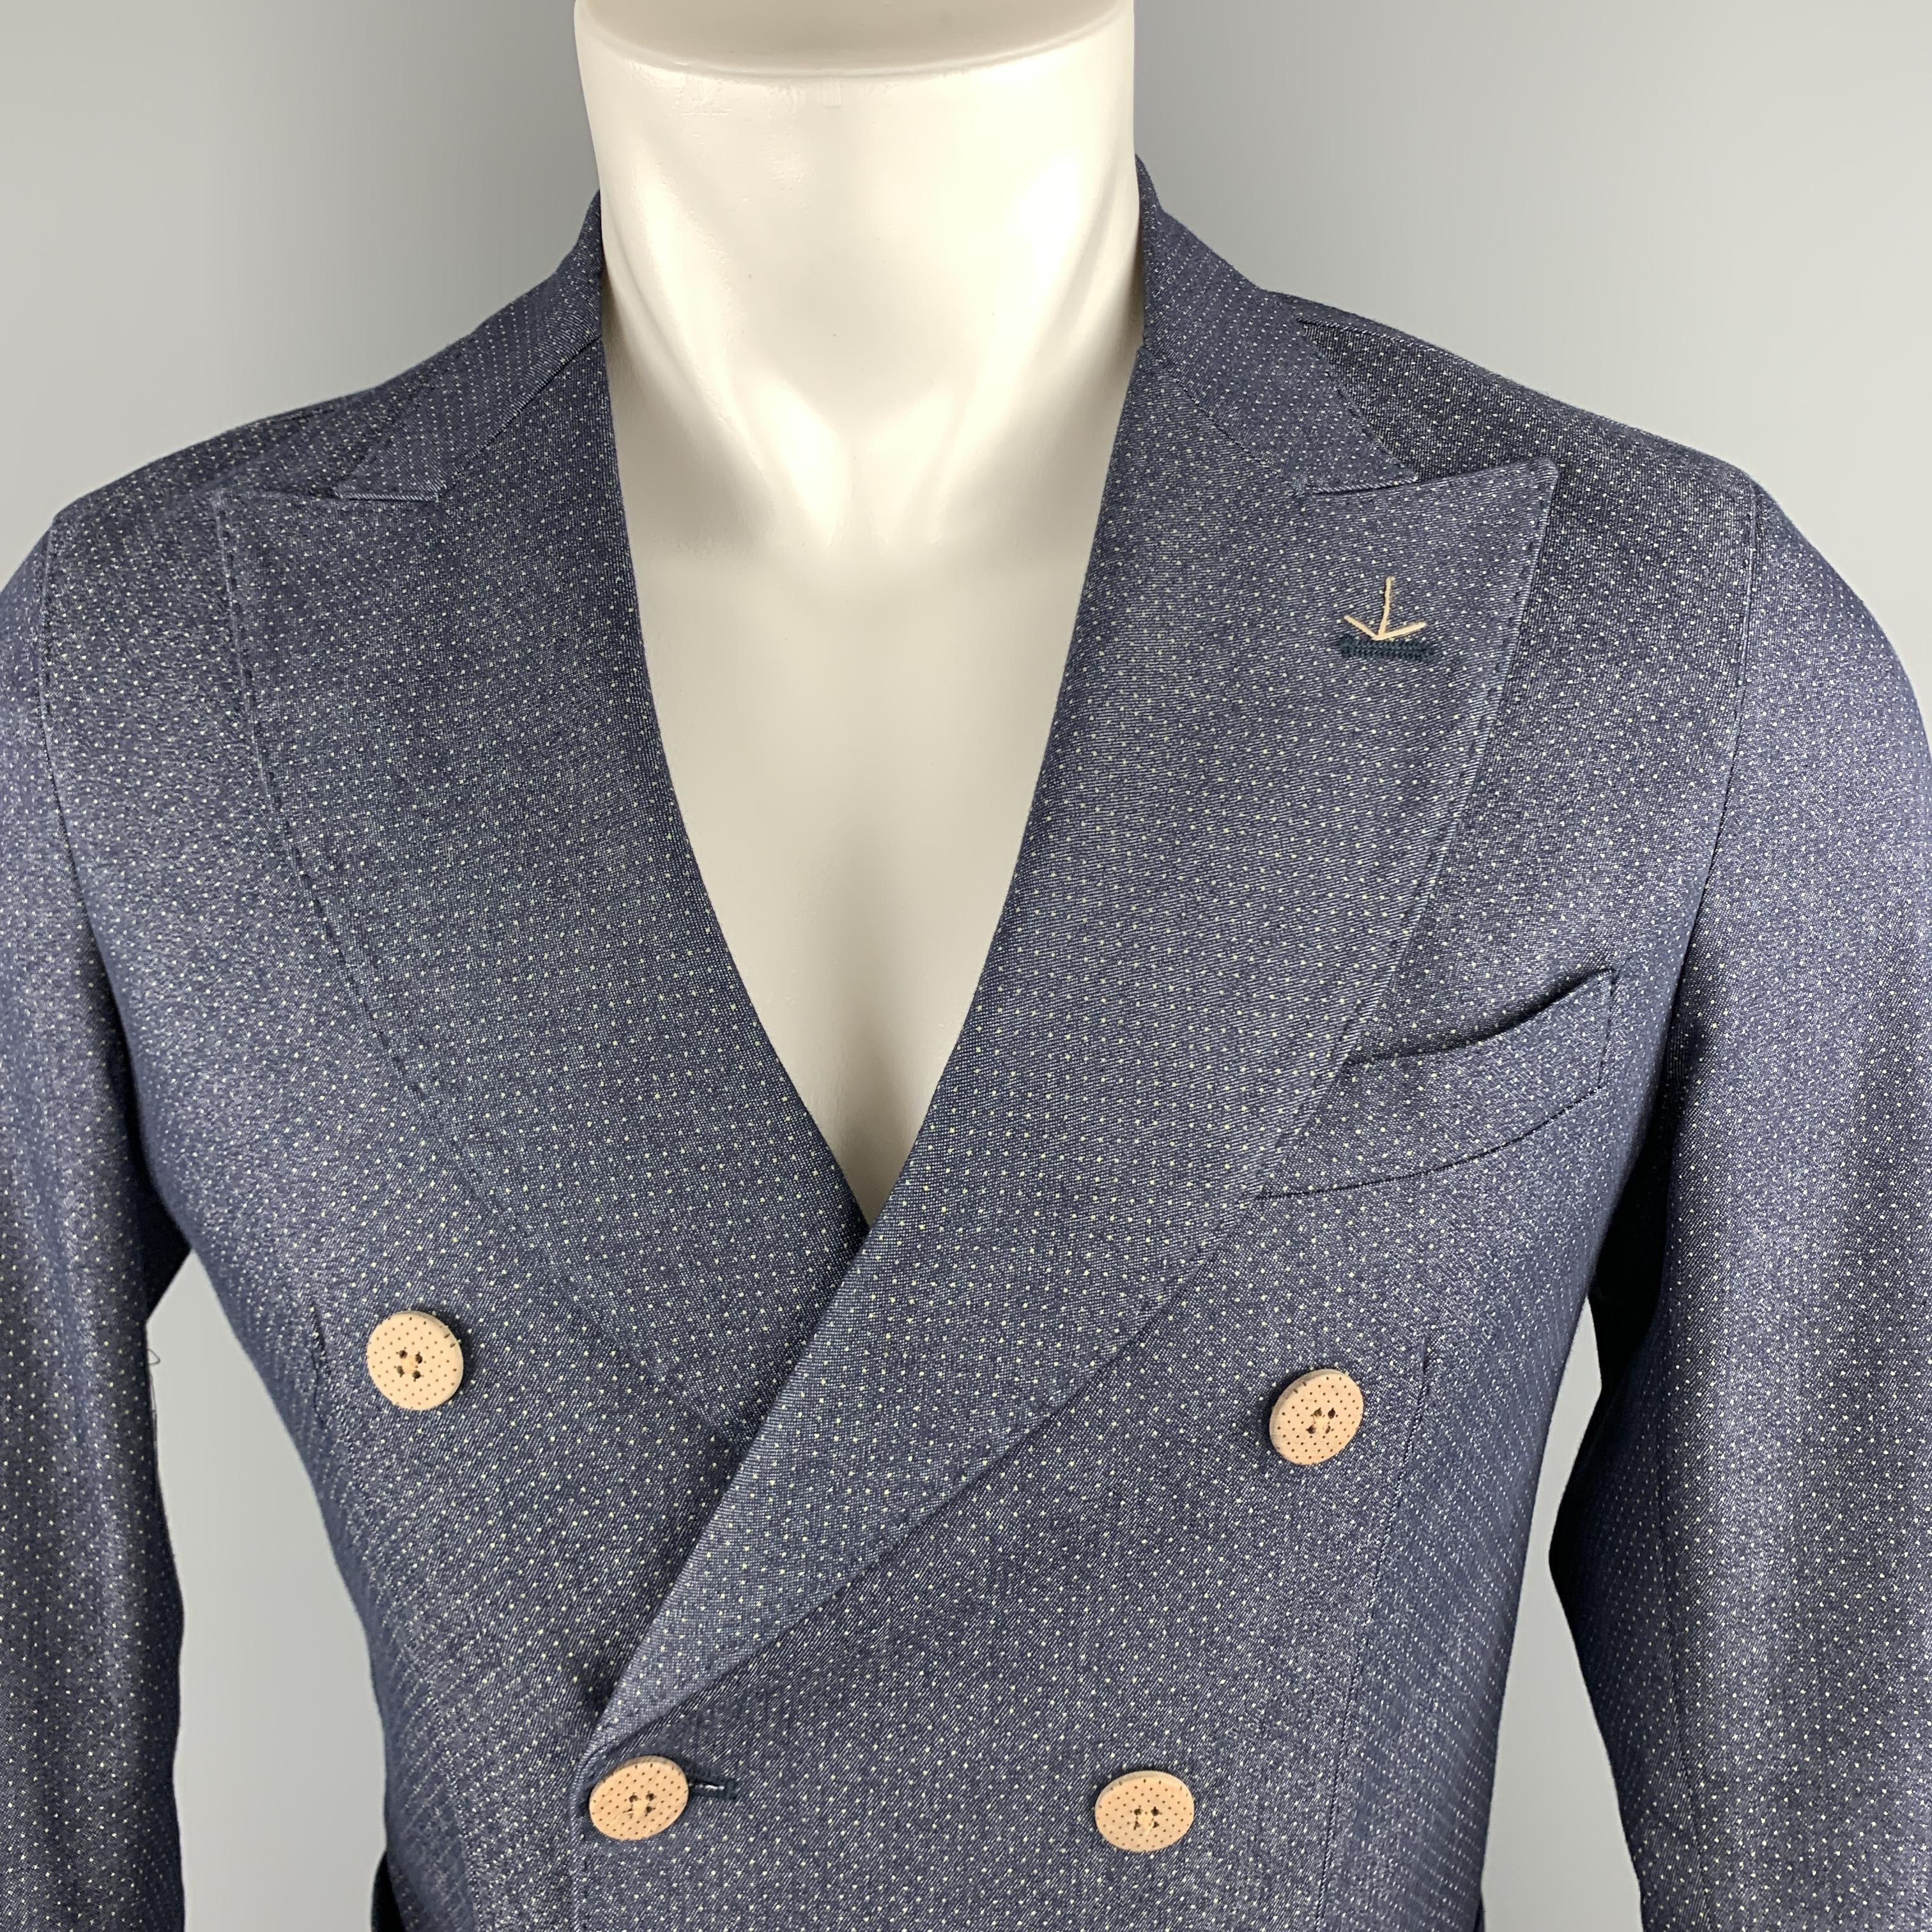 MARTIN ZELO sport coat comes in blue spotted cotton blend material with a peak lapel, double breasted, two button front, and mock button cuff. Made in Italy.

Excellent Pre-Owned Condition.
Marked: IT 46

Measurements:

Shoulder: 16 in.
Chest: 38